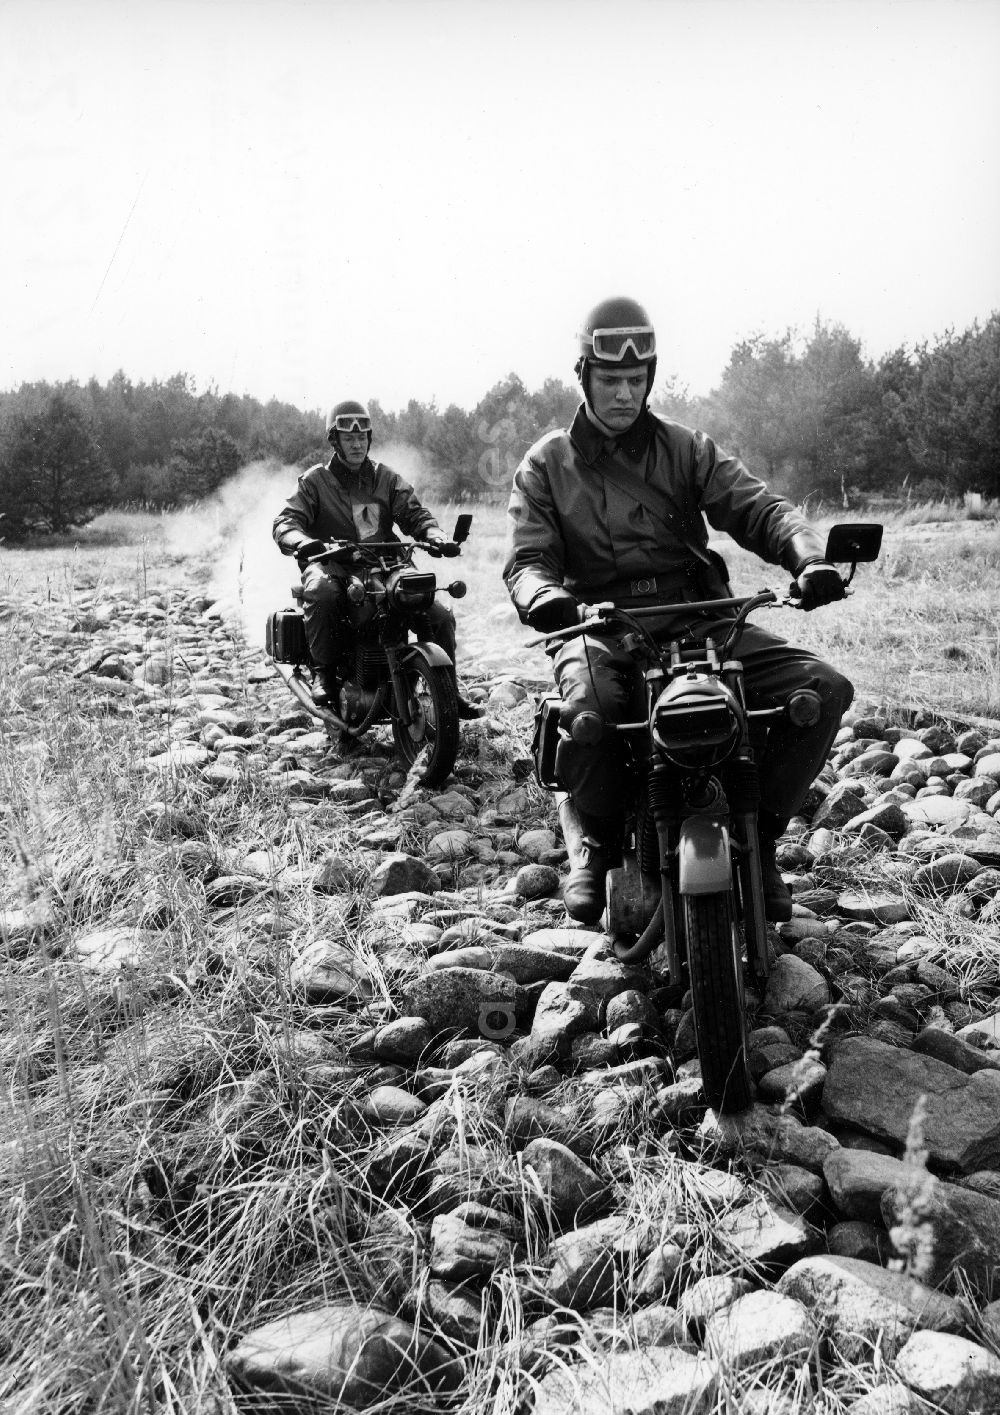 GDR photo archive: Abbenrode - Motorized border guards on MZ motorcycles during a patrol ride near Abbenrode in Harz in today's federal state of Saxony-Anhalt